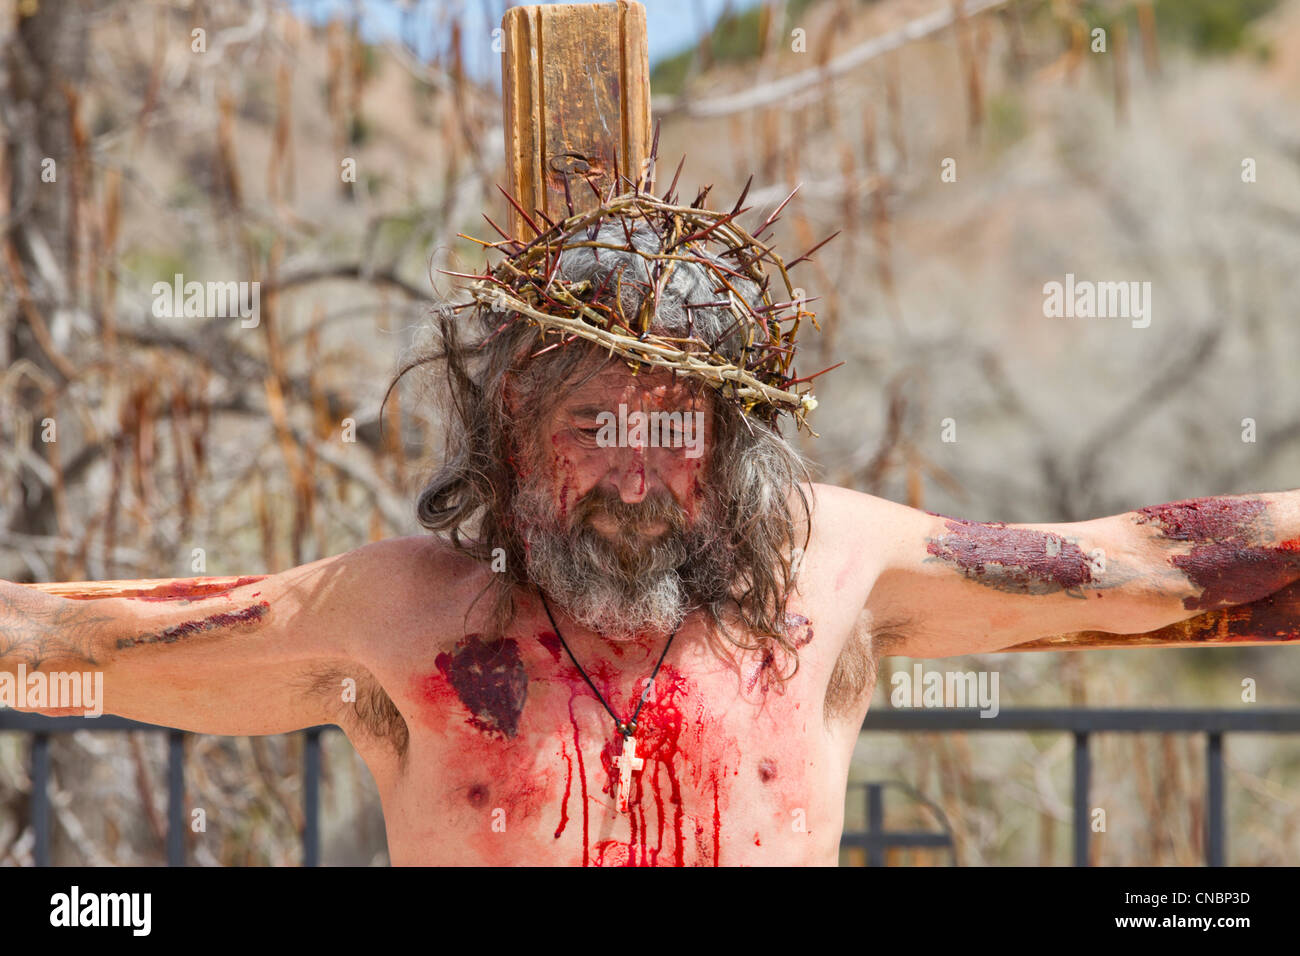 Re-enactement of the Passion of the Christ during Easter celebrations at the Chimayo Sanctuary, New Mexico. Stock Photo